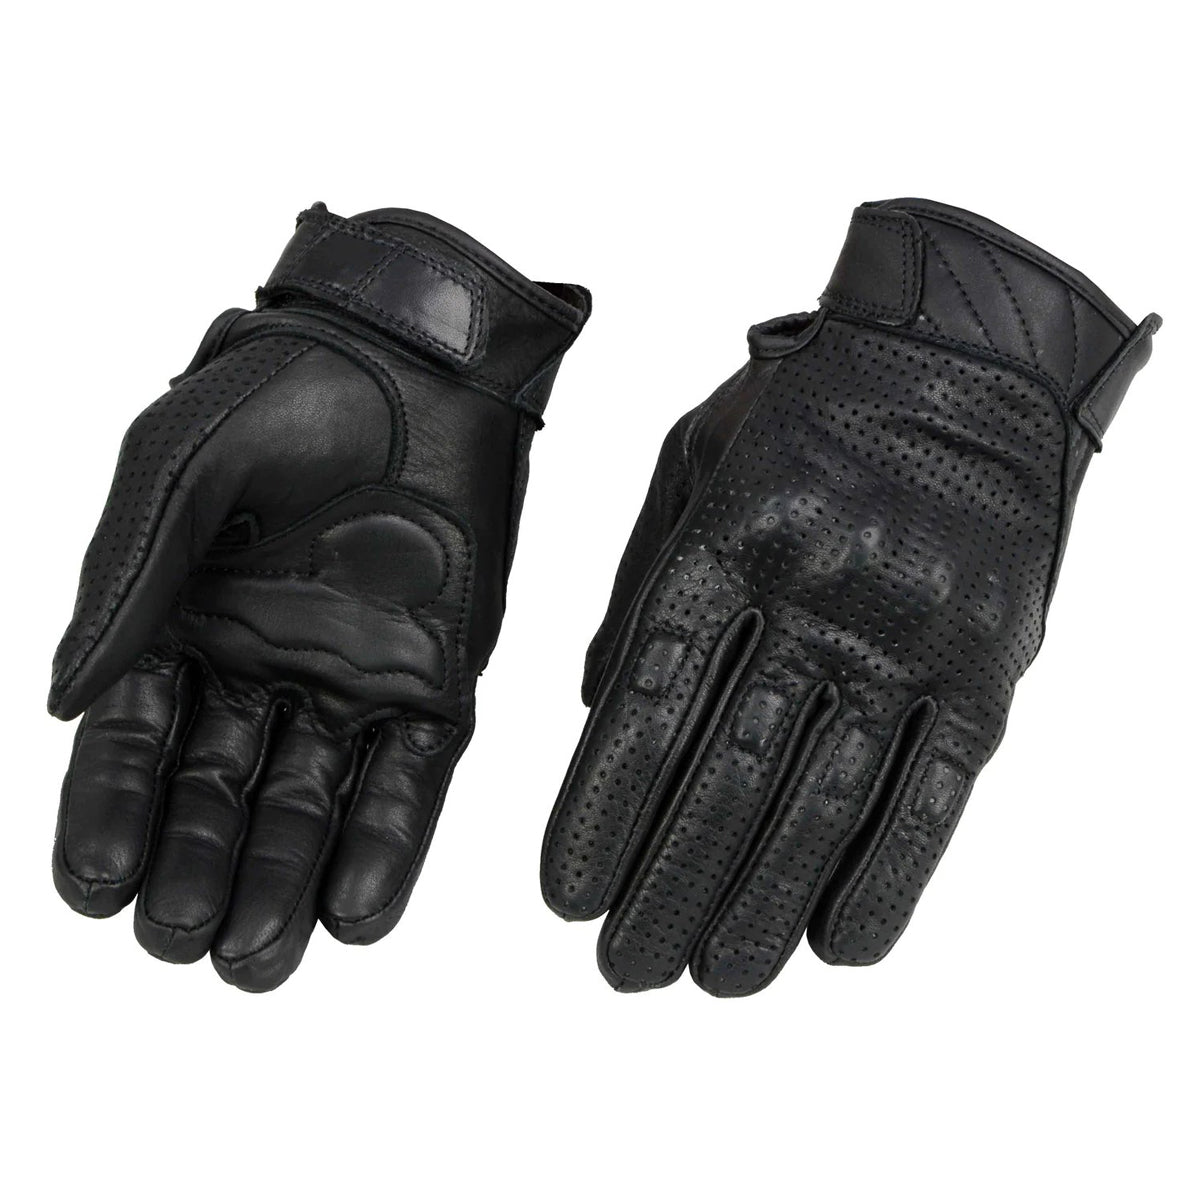 Men's Black Perforated Leather Gel Padded Palm Motorcycle Hand Gloves W/ 'Rubberized Hard Knuckle’ For Protection